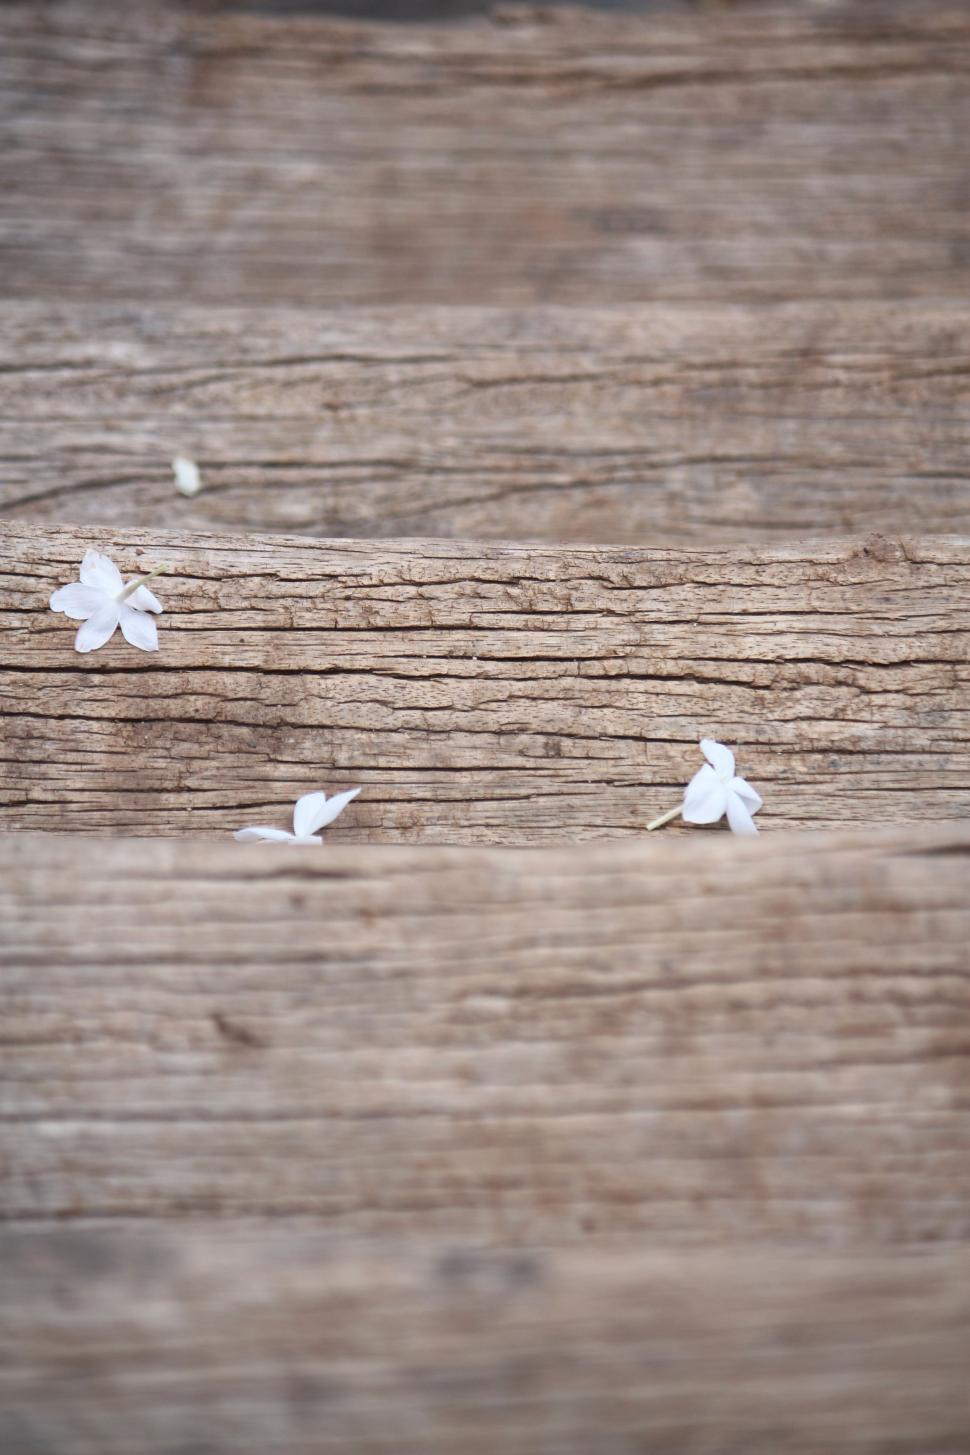 Free Image of Group of White Birds Flying Over Wooden Surface 